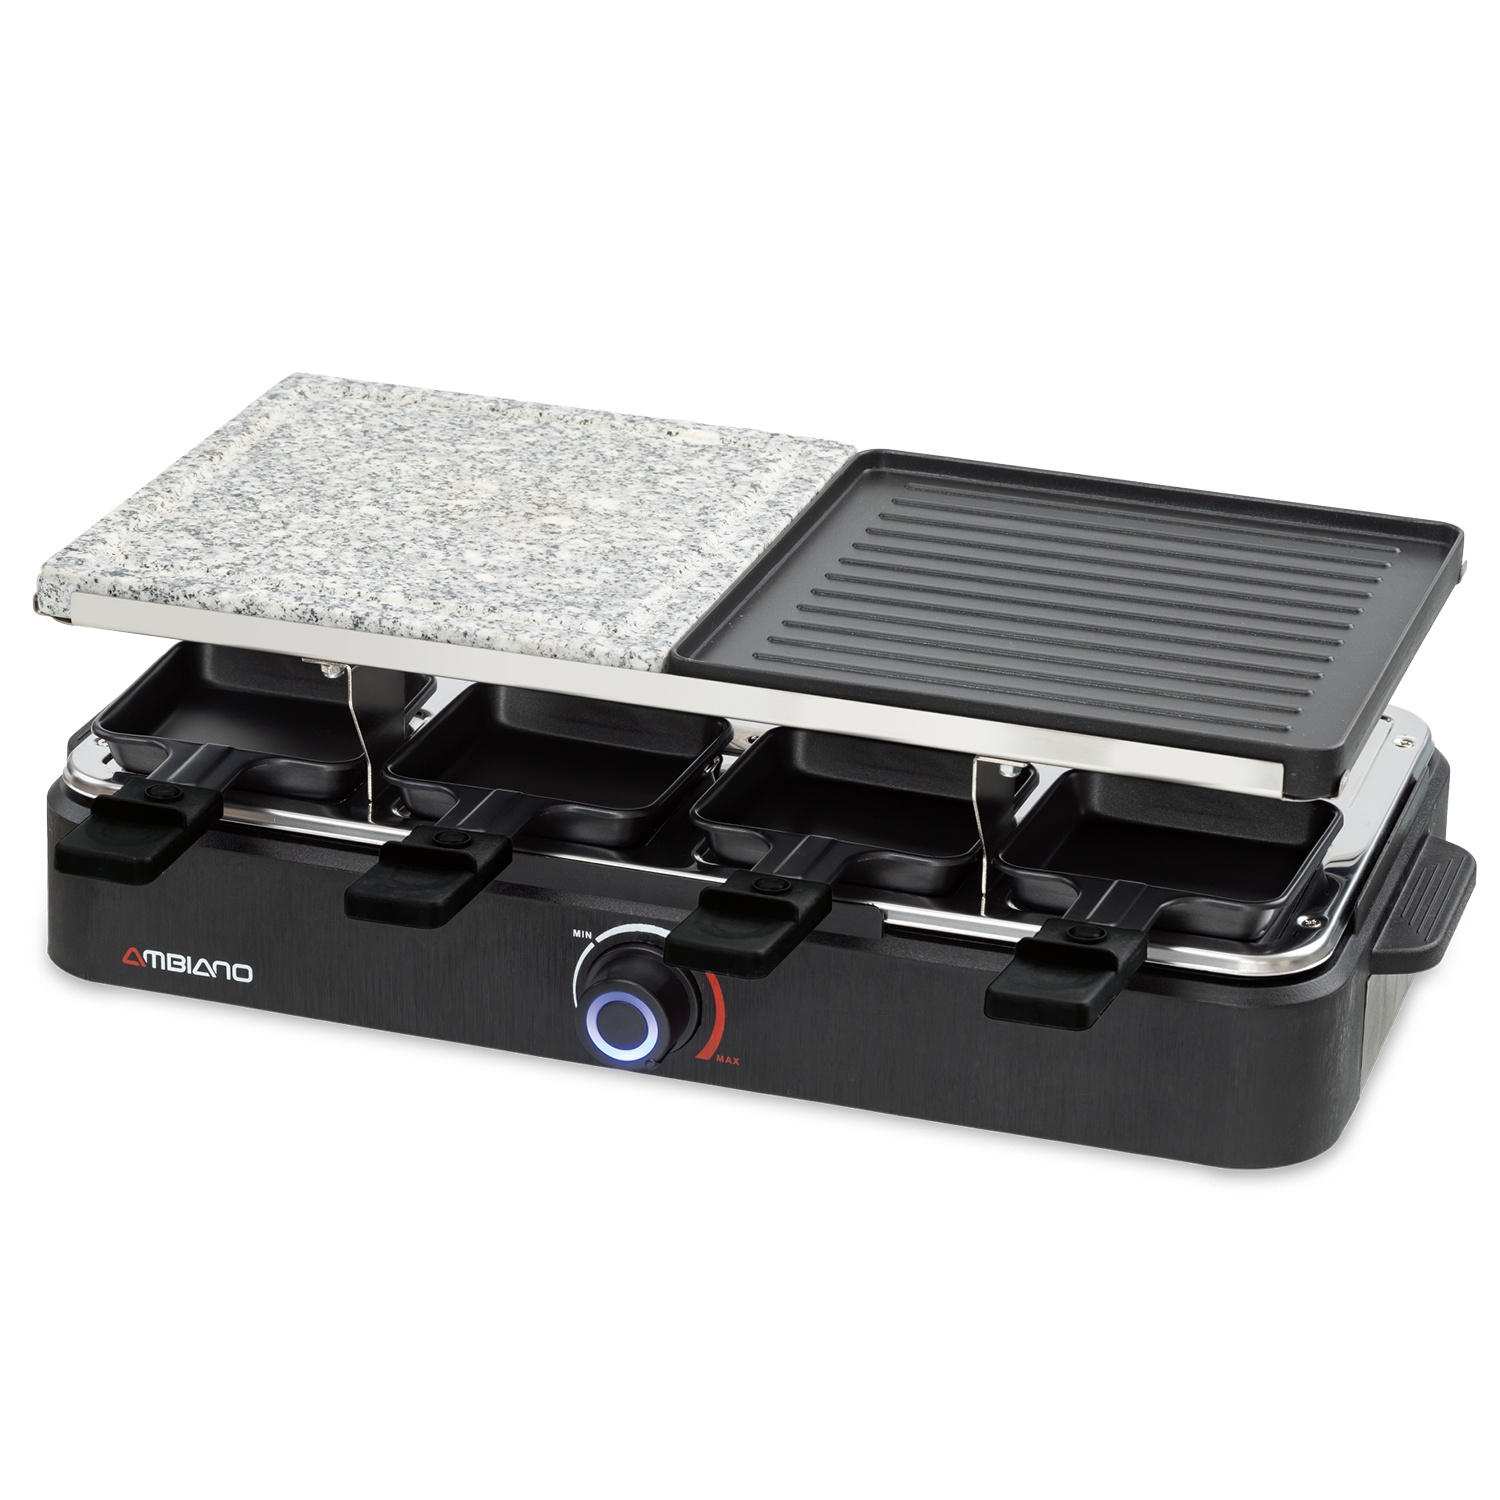 AMBIANO Raclette-Grill